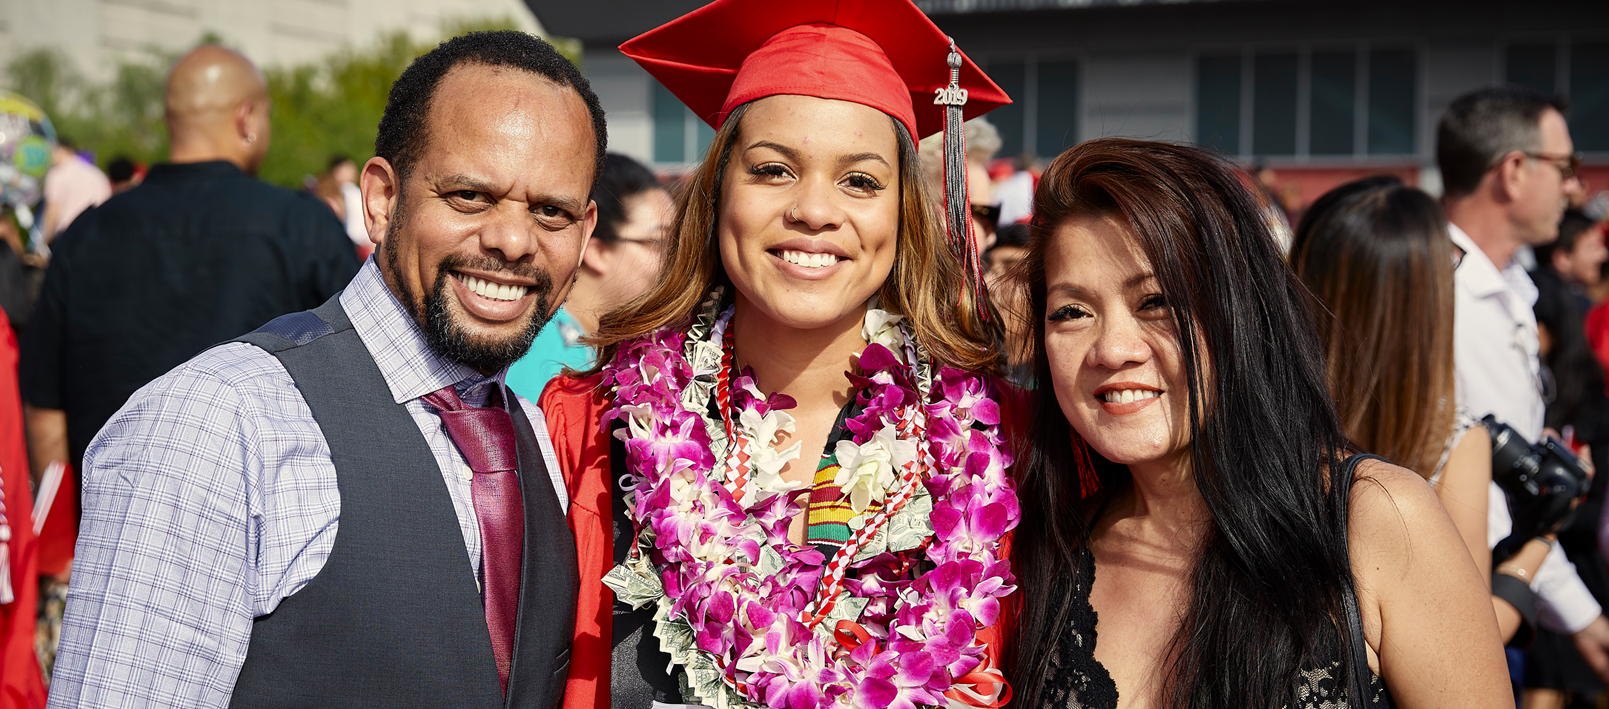 Student smiling with parents at graduation